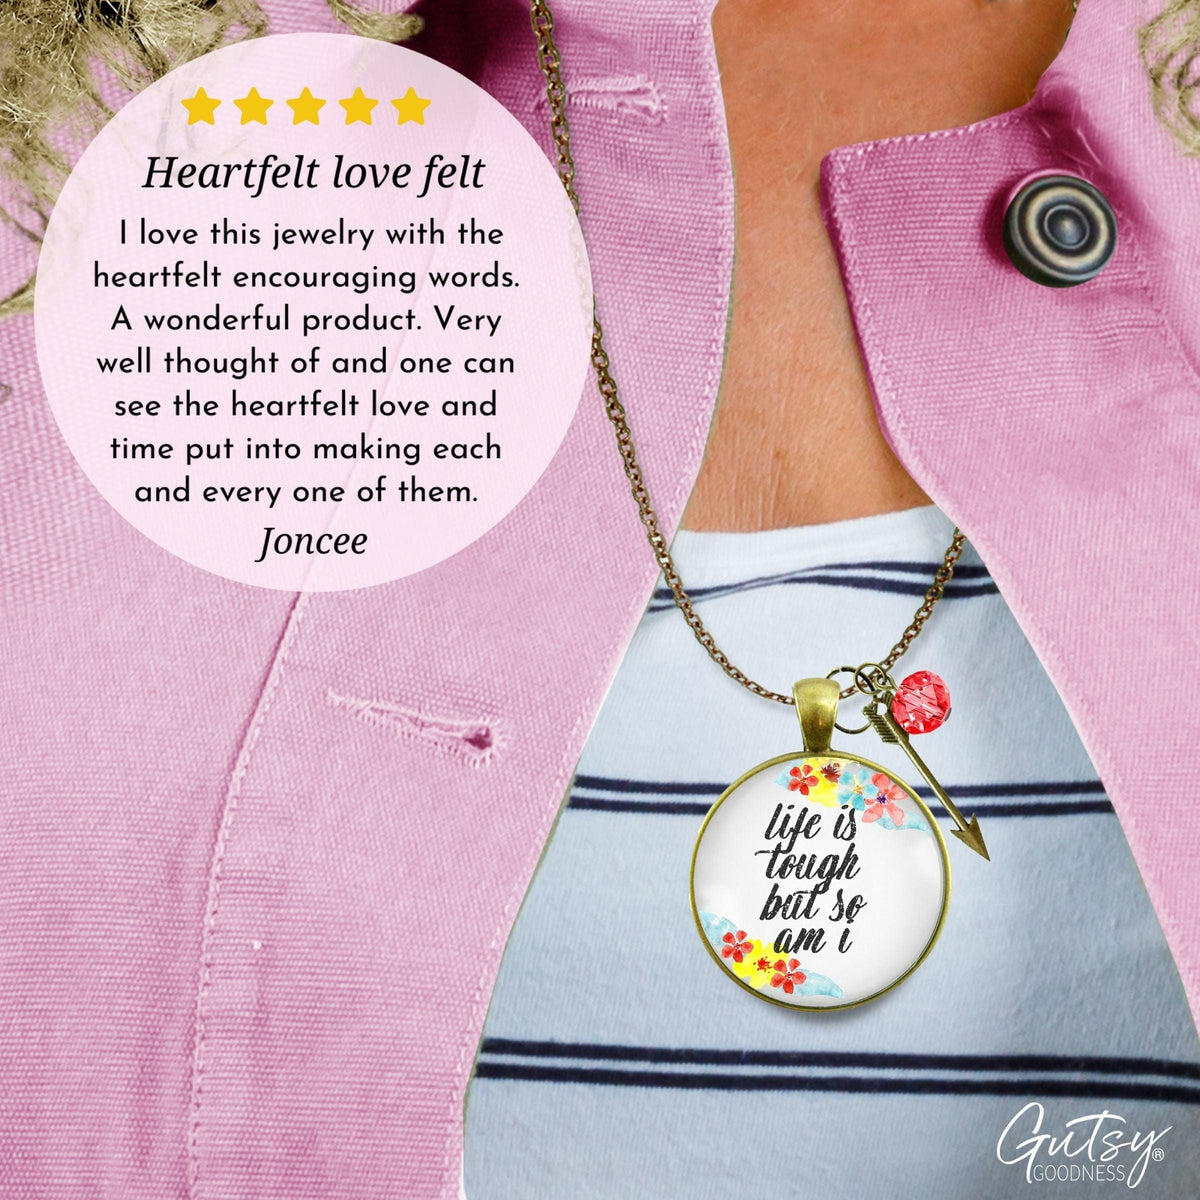 Gutsy Goodness Survivor Necklace Life is Tough But So Am I Women Strength Jewelry - Gutsy Goodness Handmade Jewelry;Survivor Necklace Life Is Tough But So Am I Women Strength Jewelry - Gutsy Goodness Handmade Jewelry Gifts